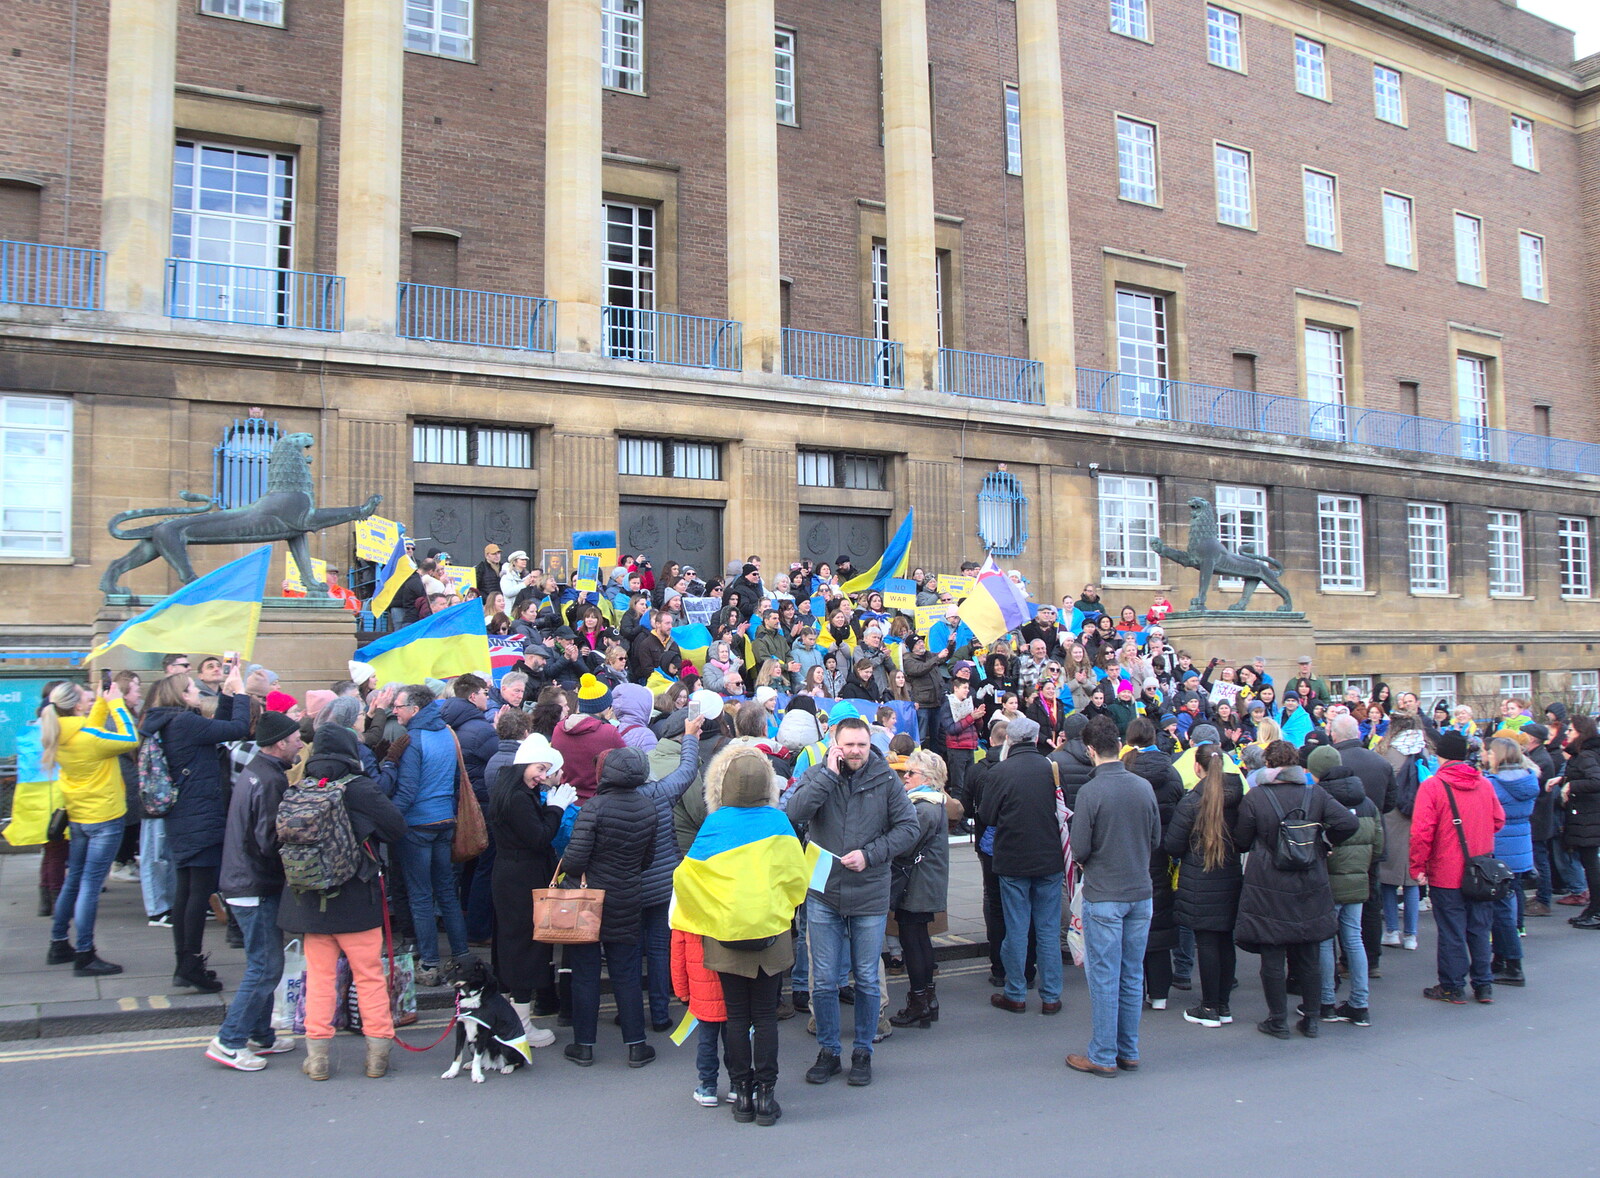 The Detectorists, and a Trip to the Market, Norwich - 25th February 2023: More Ukrainian flag waving outside City Hall